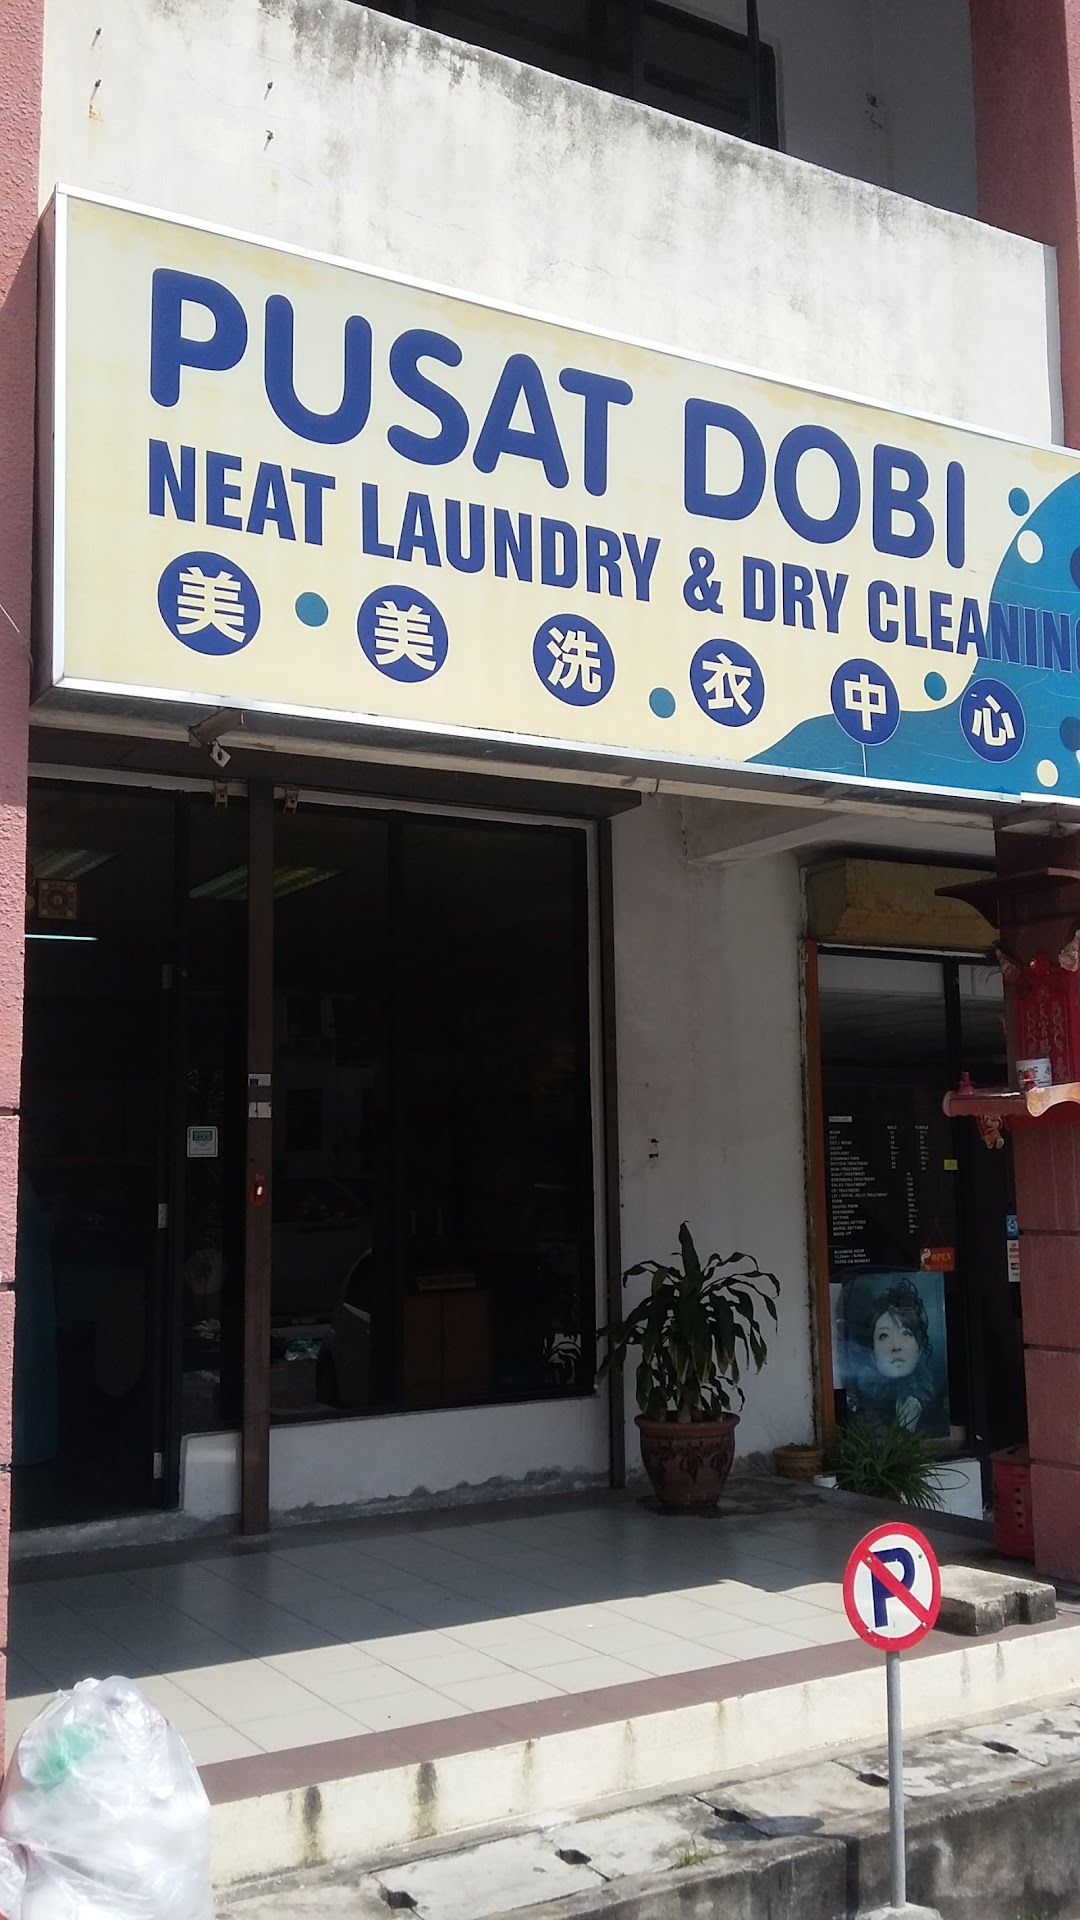 Neat Laundry & Dry Cleaning